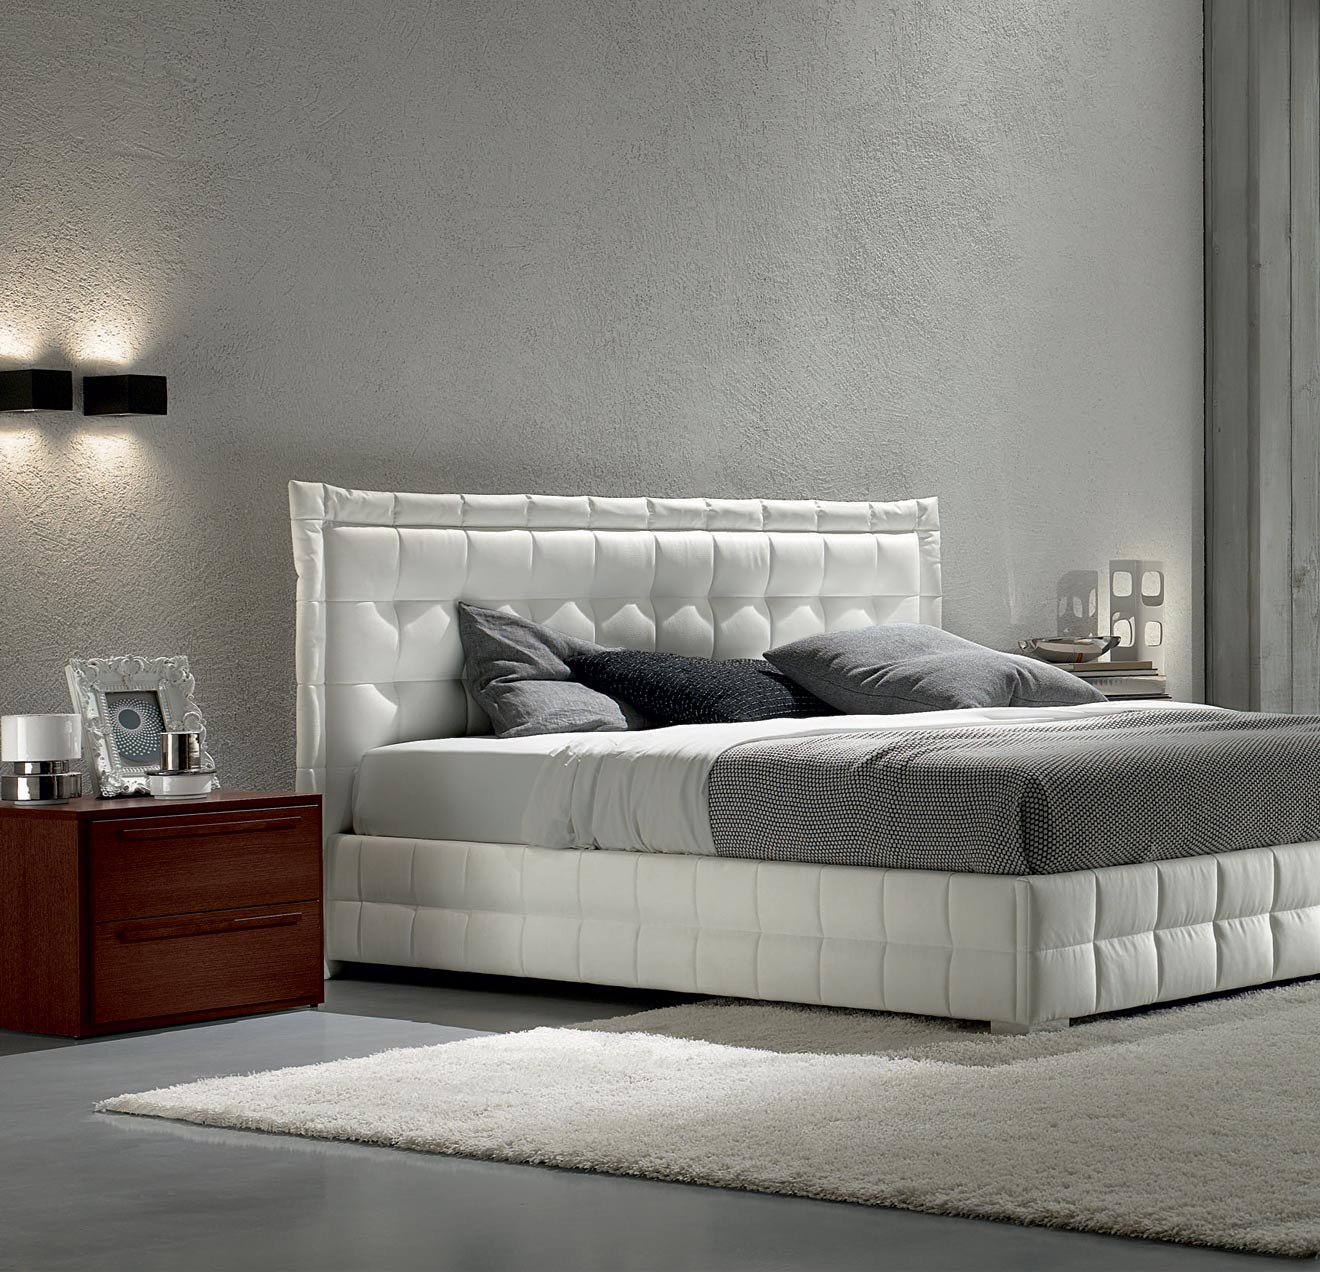 custom-bedroom-furniture-designs-with-image-of-bedroom-furniture-collection-fresh-at-gallery